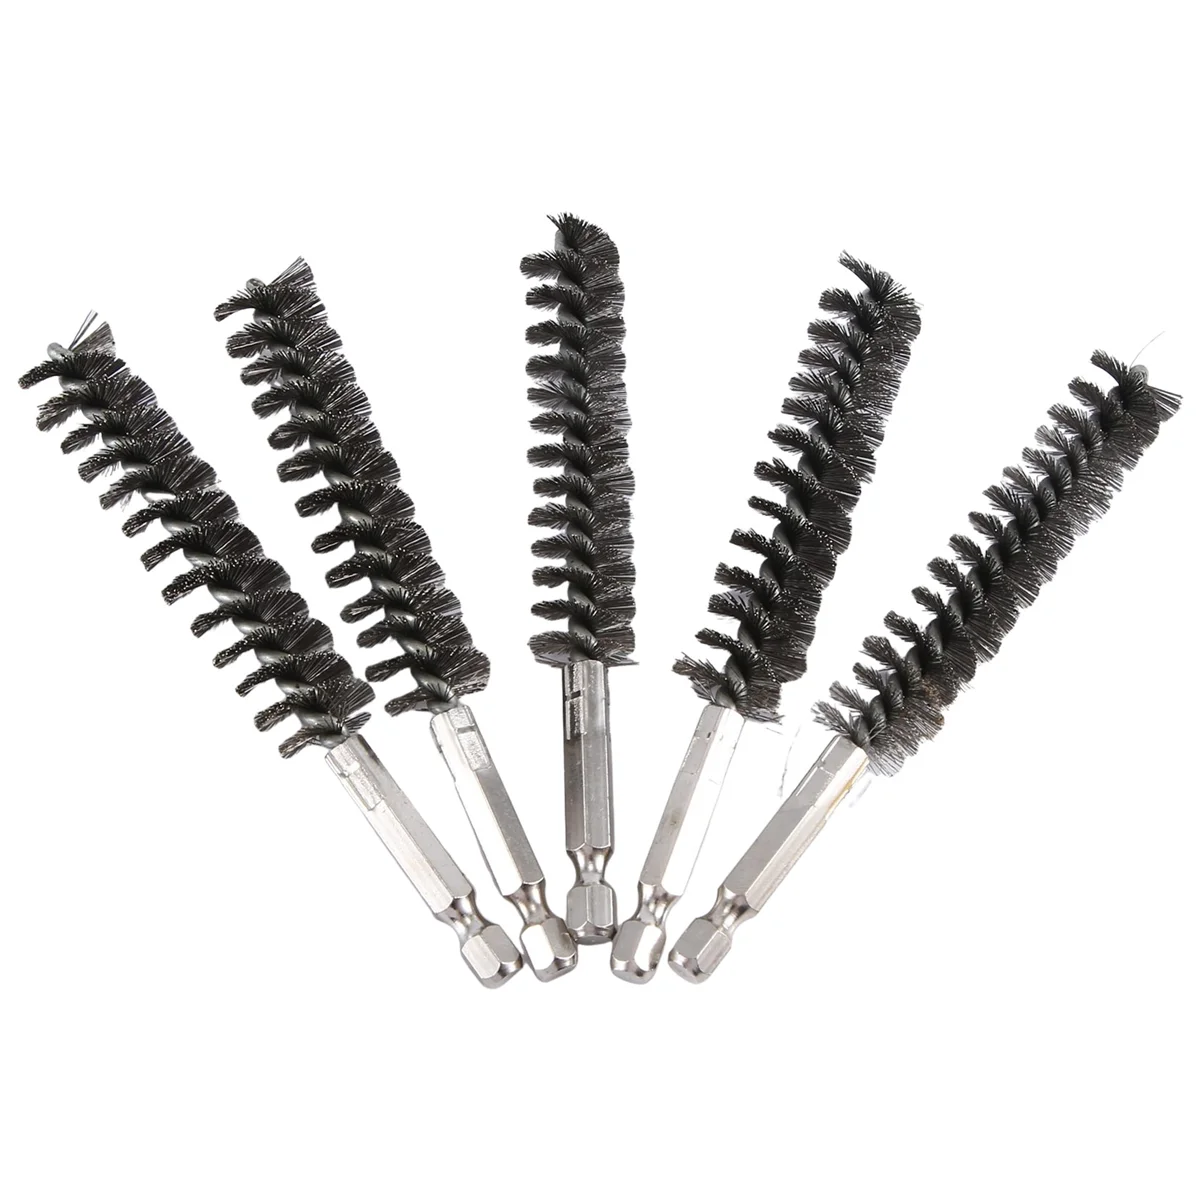 

Stainless Steel Bore Brush Wire Brush for Power Drill Cleaning Wire Brush Stainless Steel Brush with Hex Shank Handle